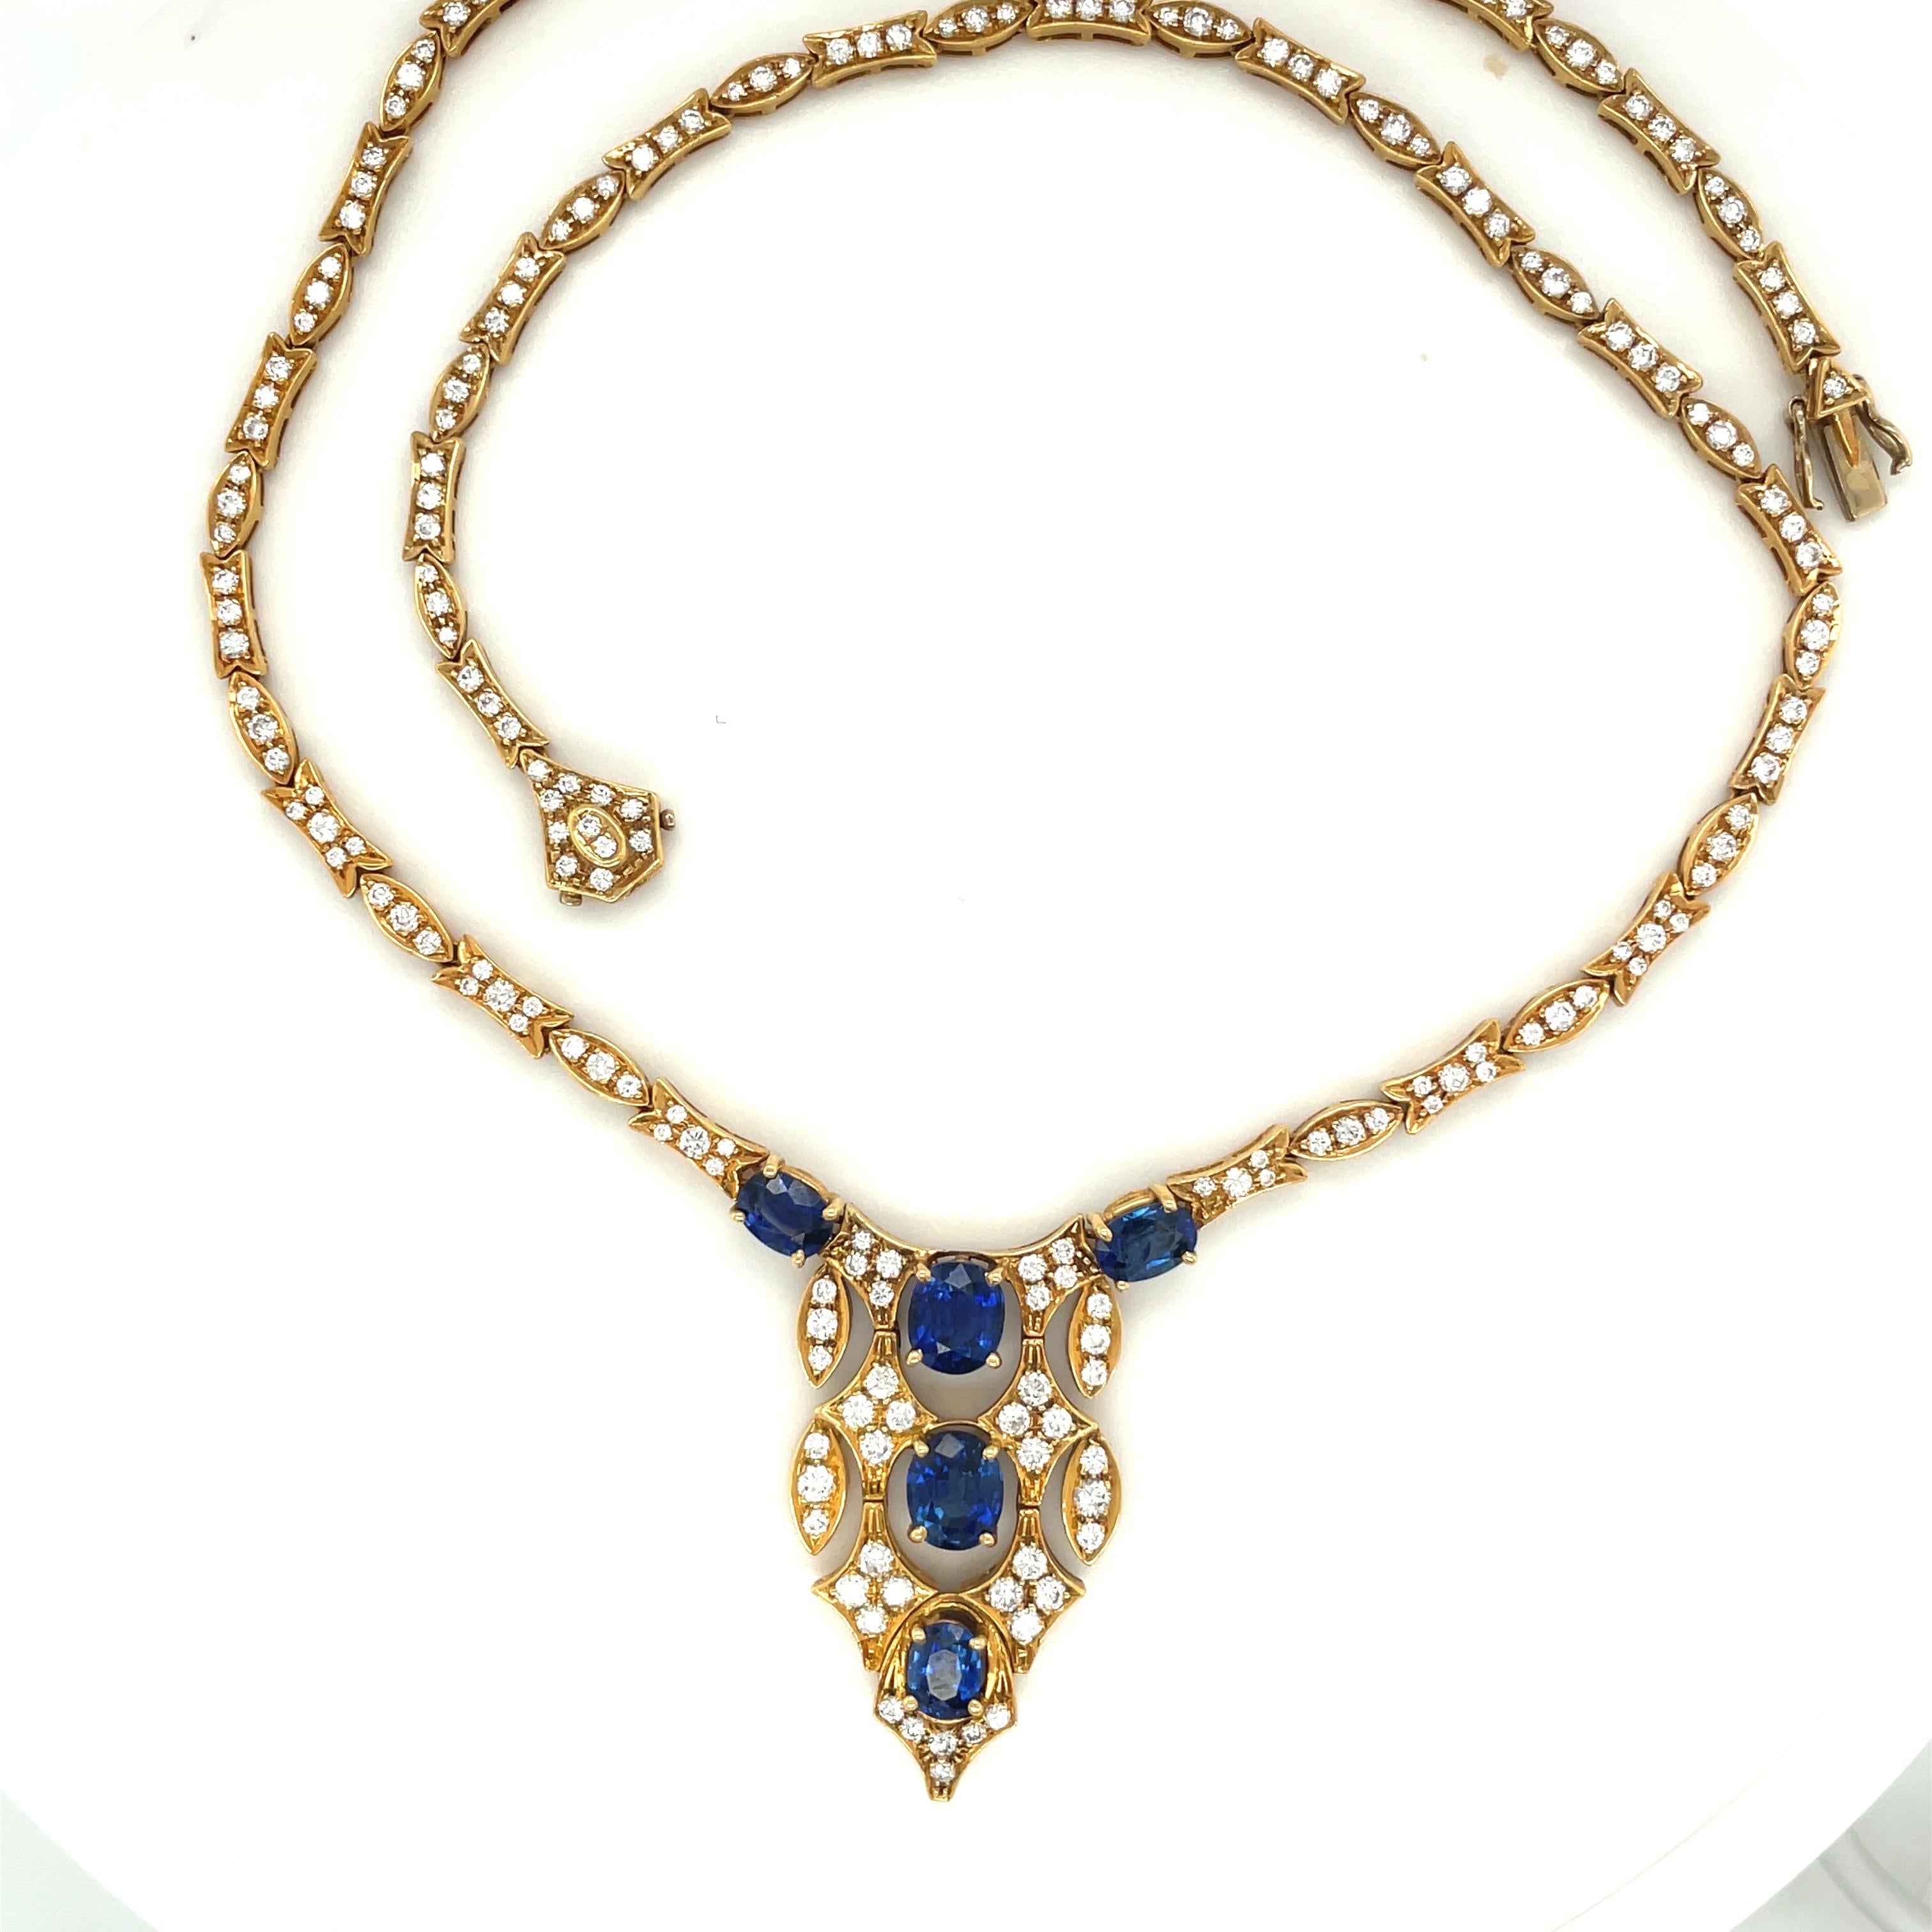 Classically designed 18 karat yellow gold necklace. The centerpiece of this necklace is set with 5 oval blue sapphires. The sapphires are accented with round diamonds set in marquise and diamond shaped links which continue to form the chain of the